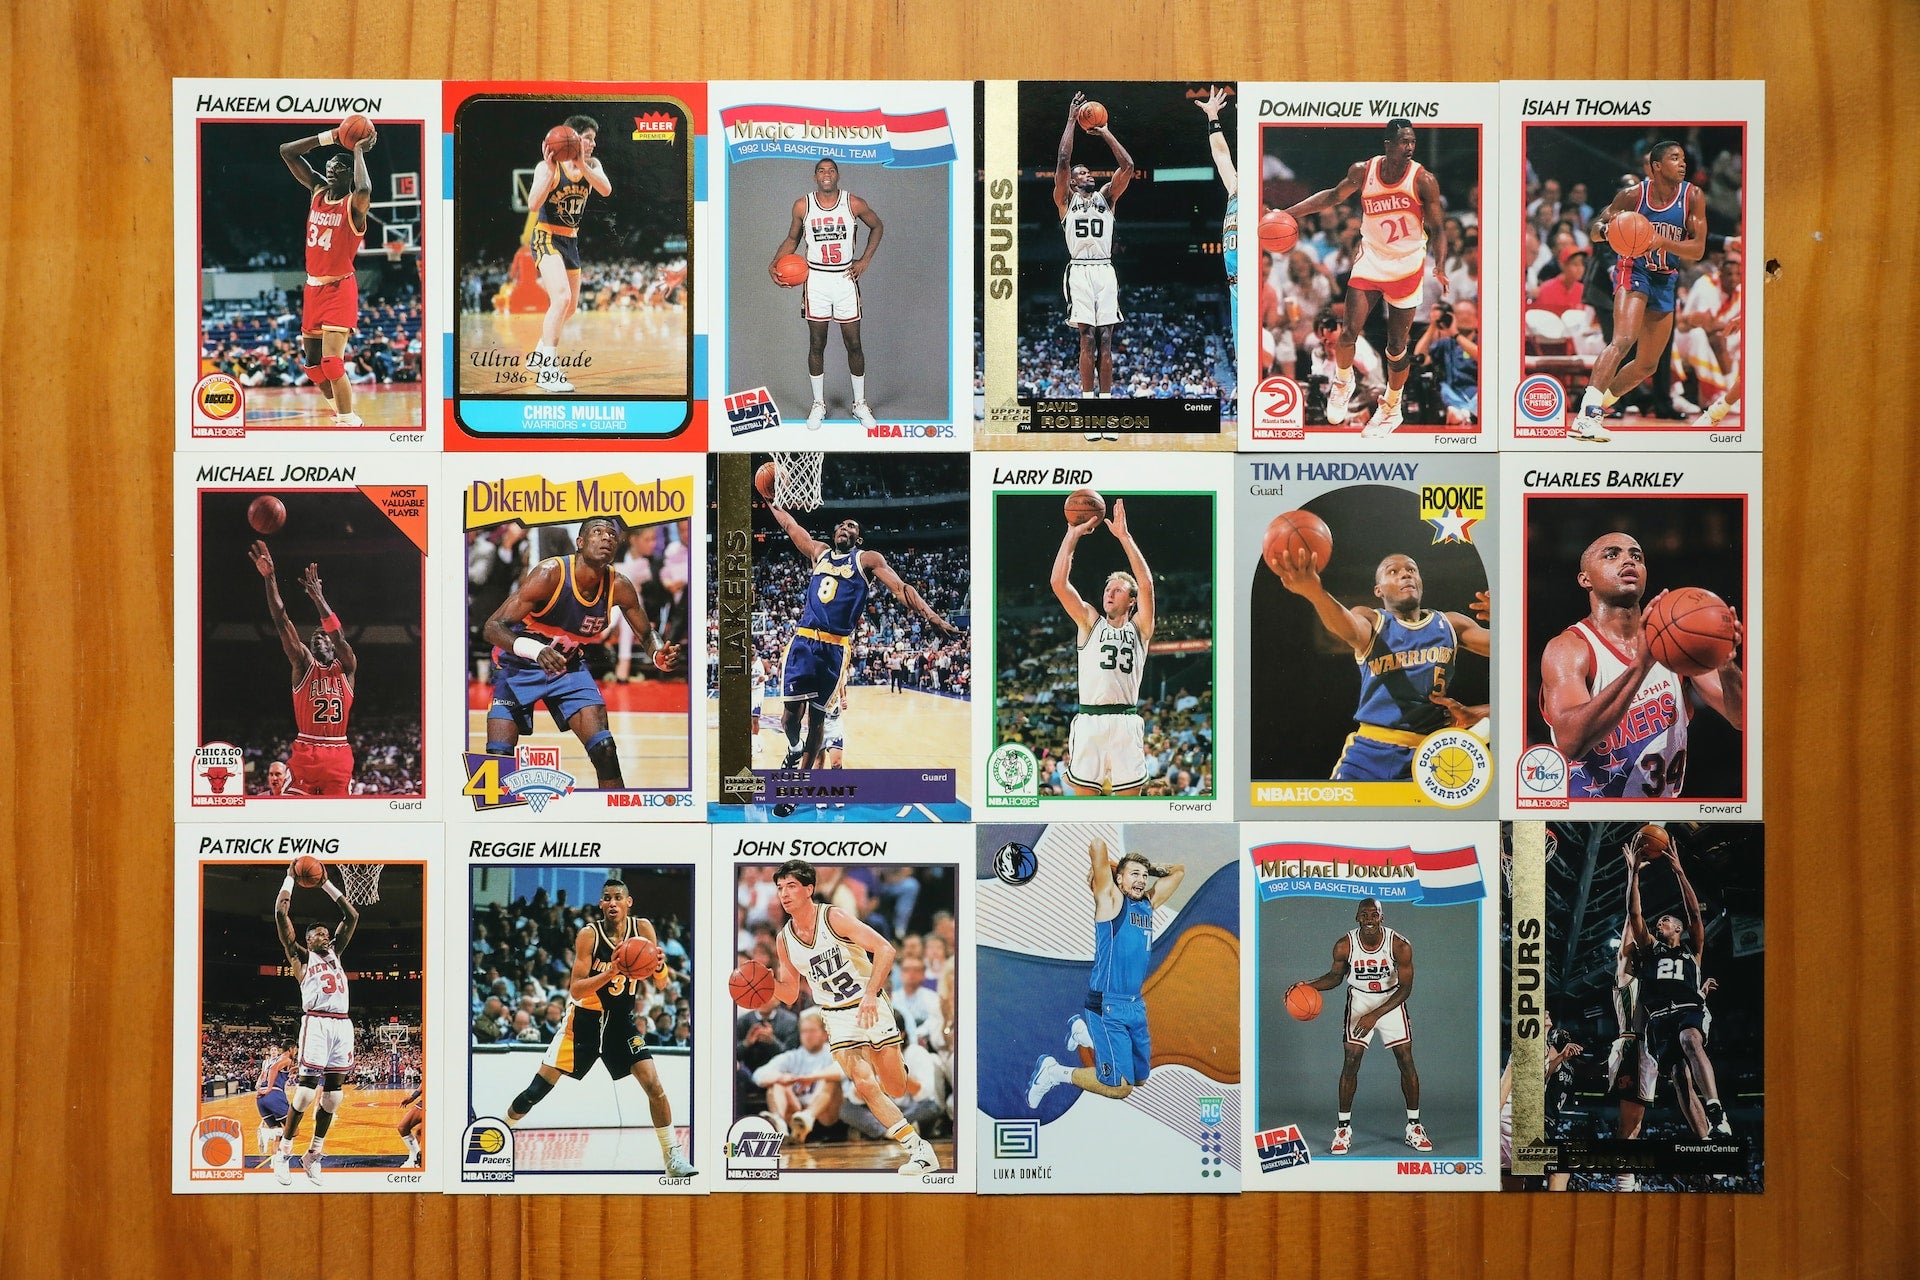 A selection of collectible basketball cards lined up